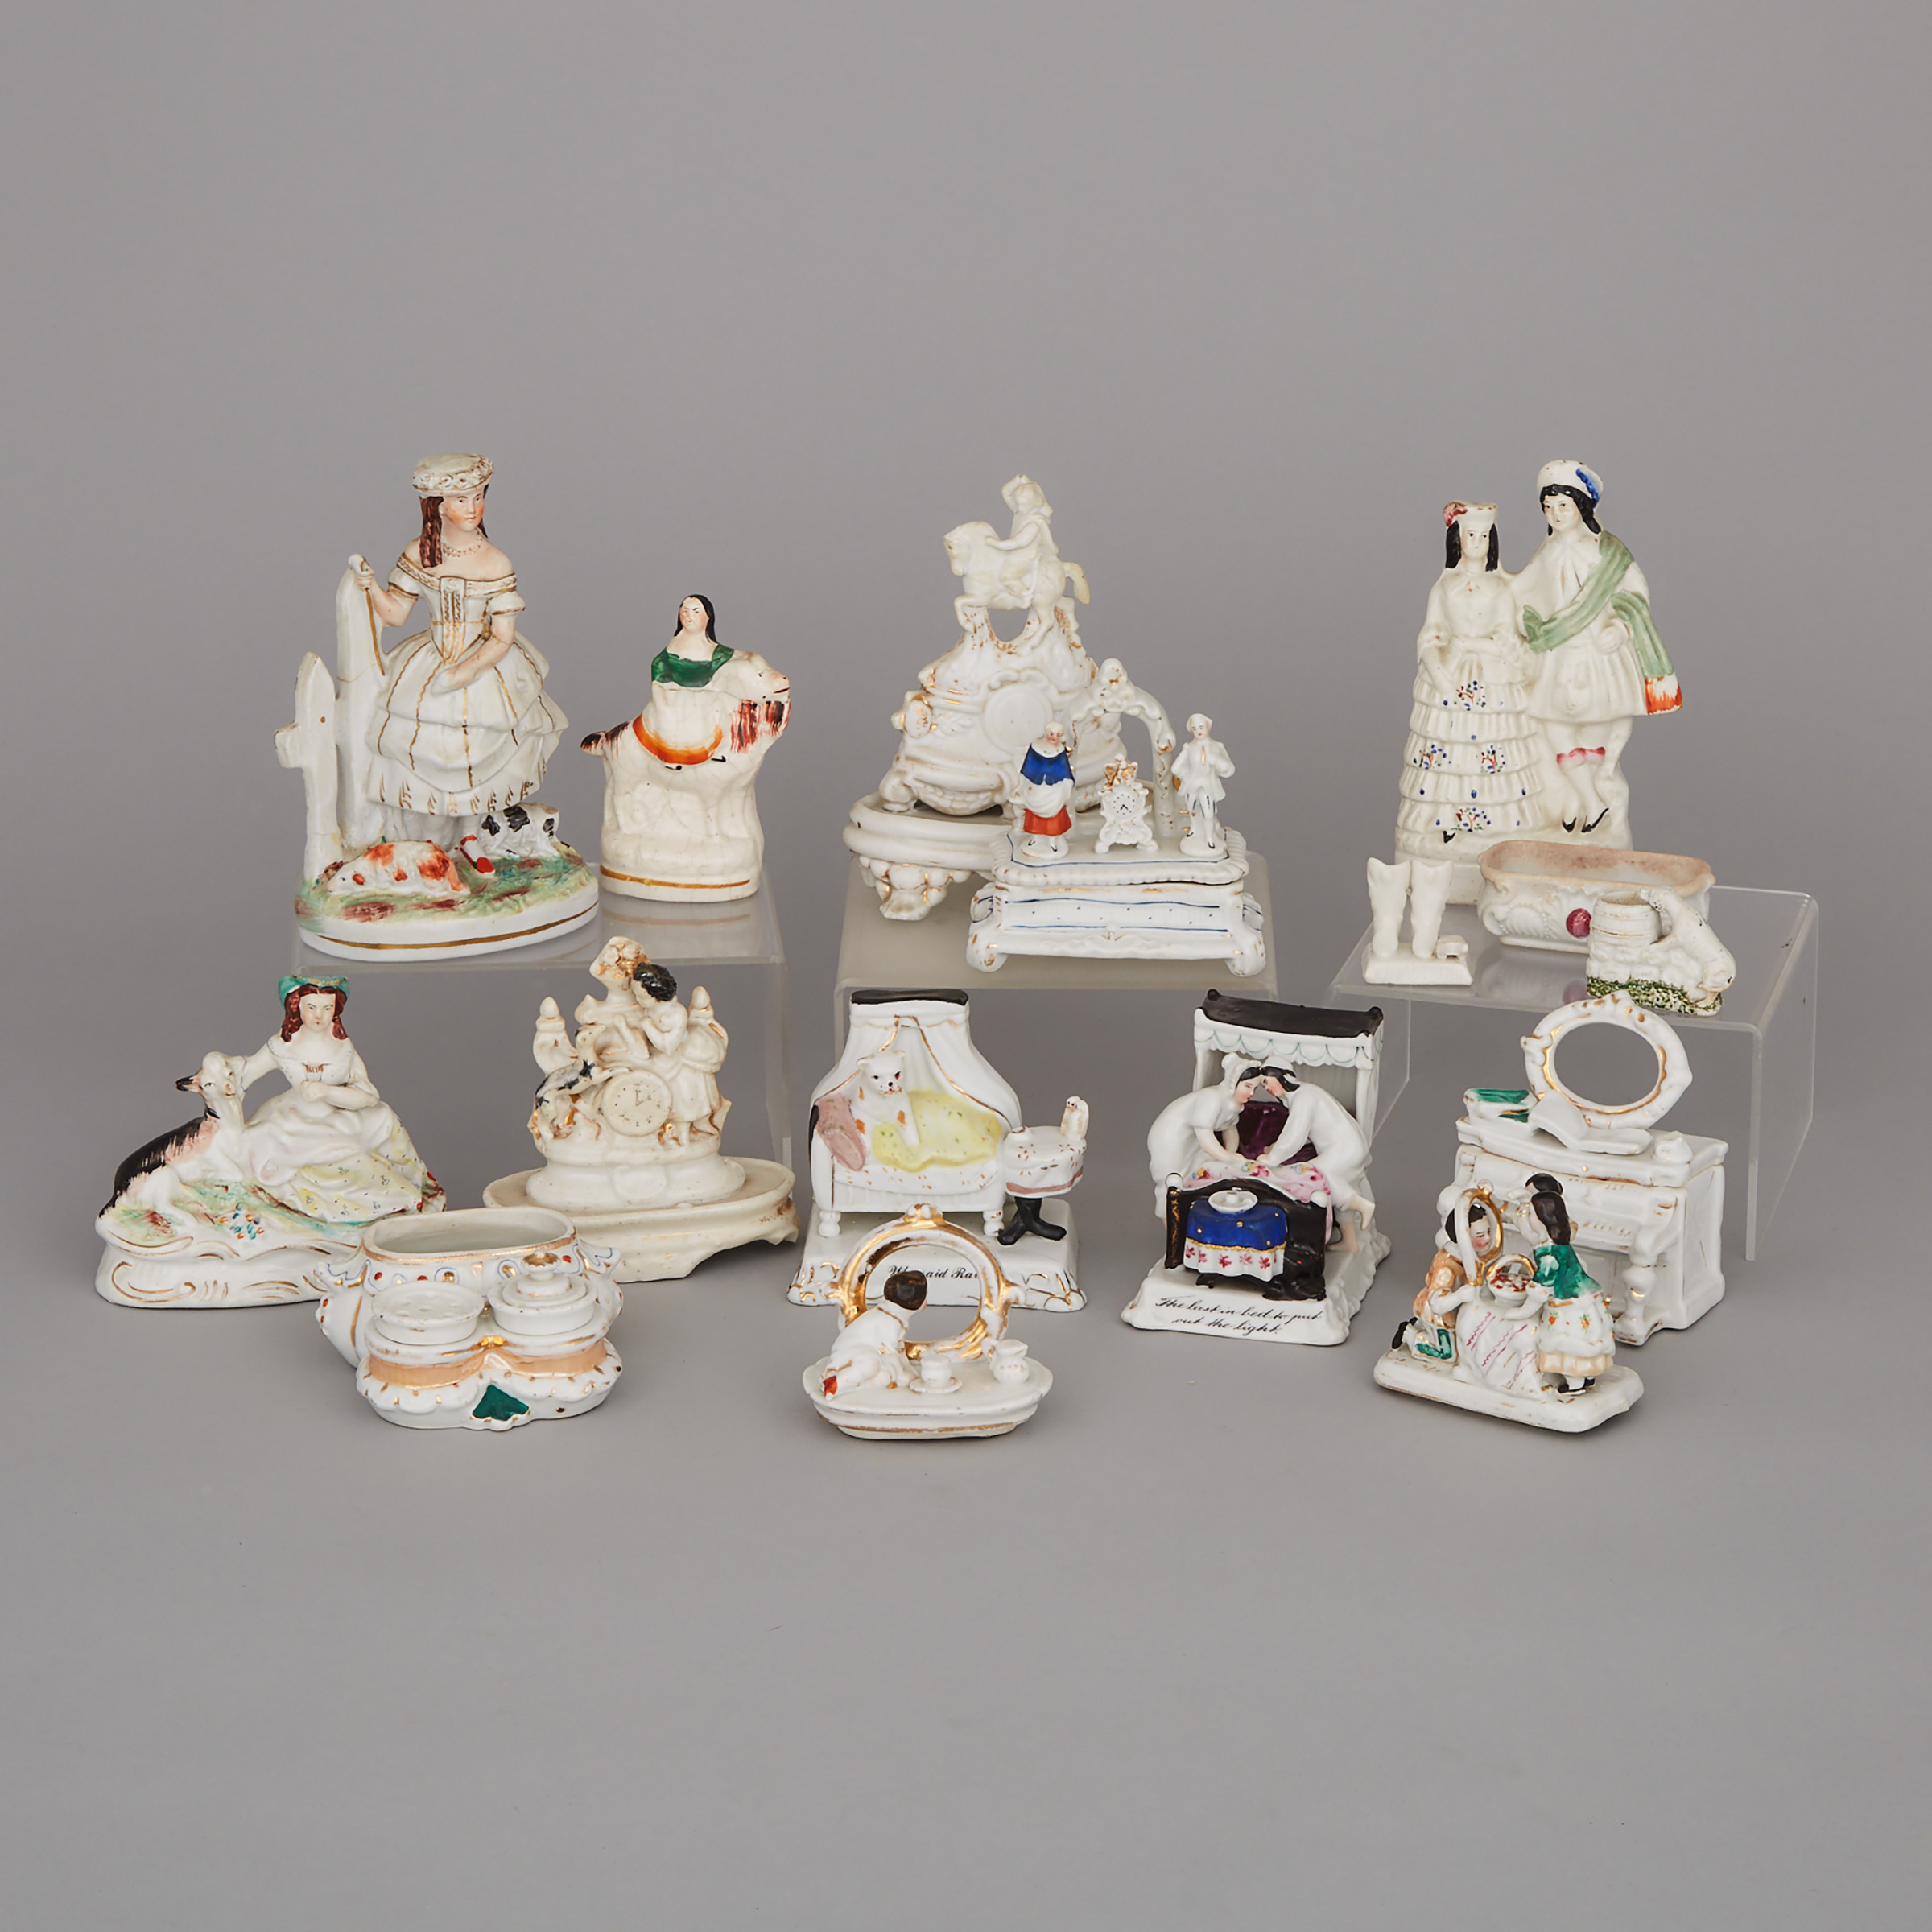 Group of Fifteen Small Staffordshire Figures, Groups and Fairings, late 19th/early 20th century